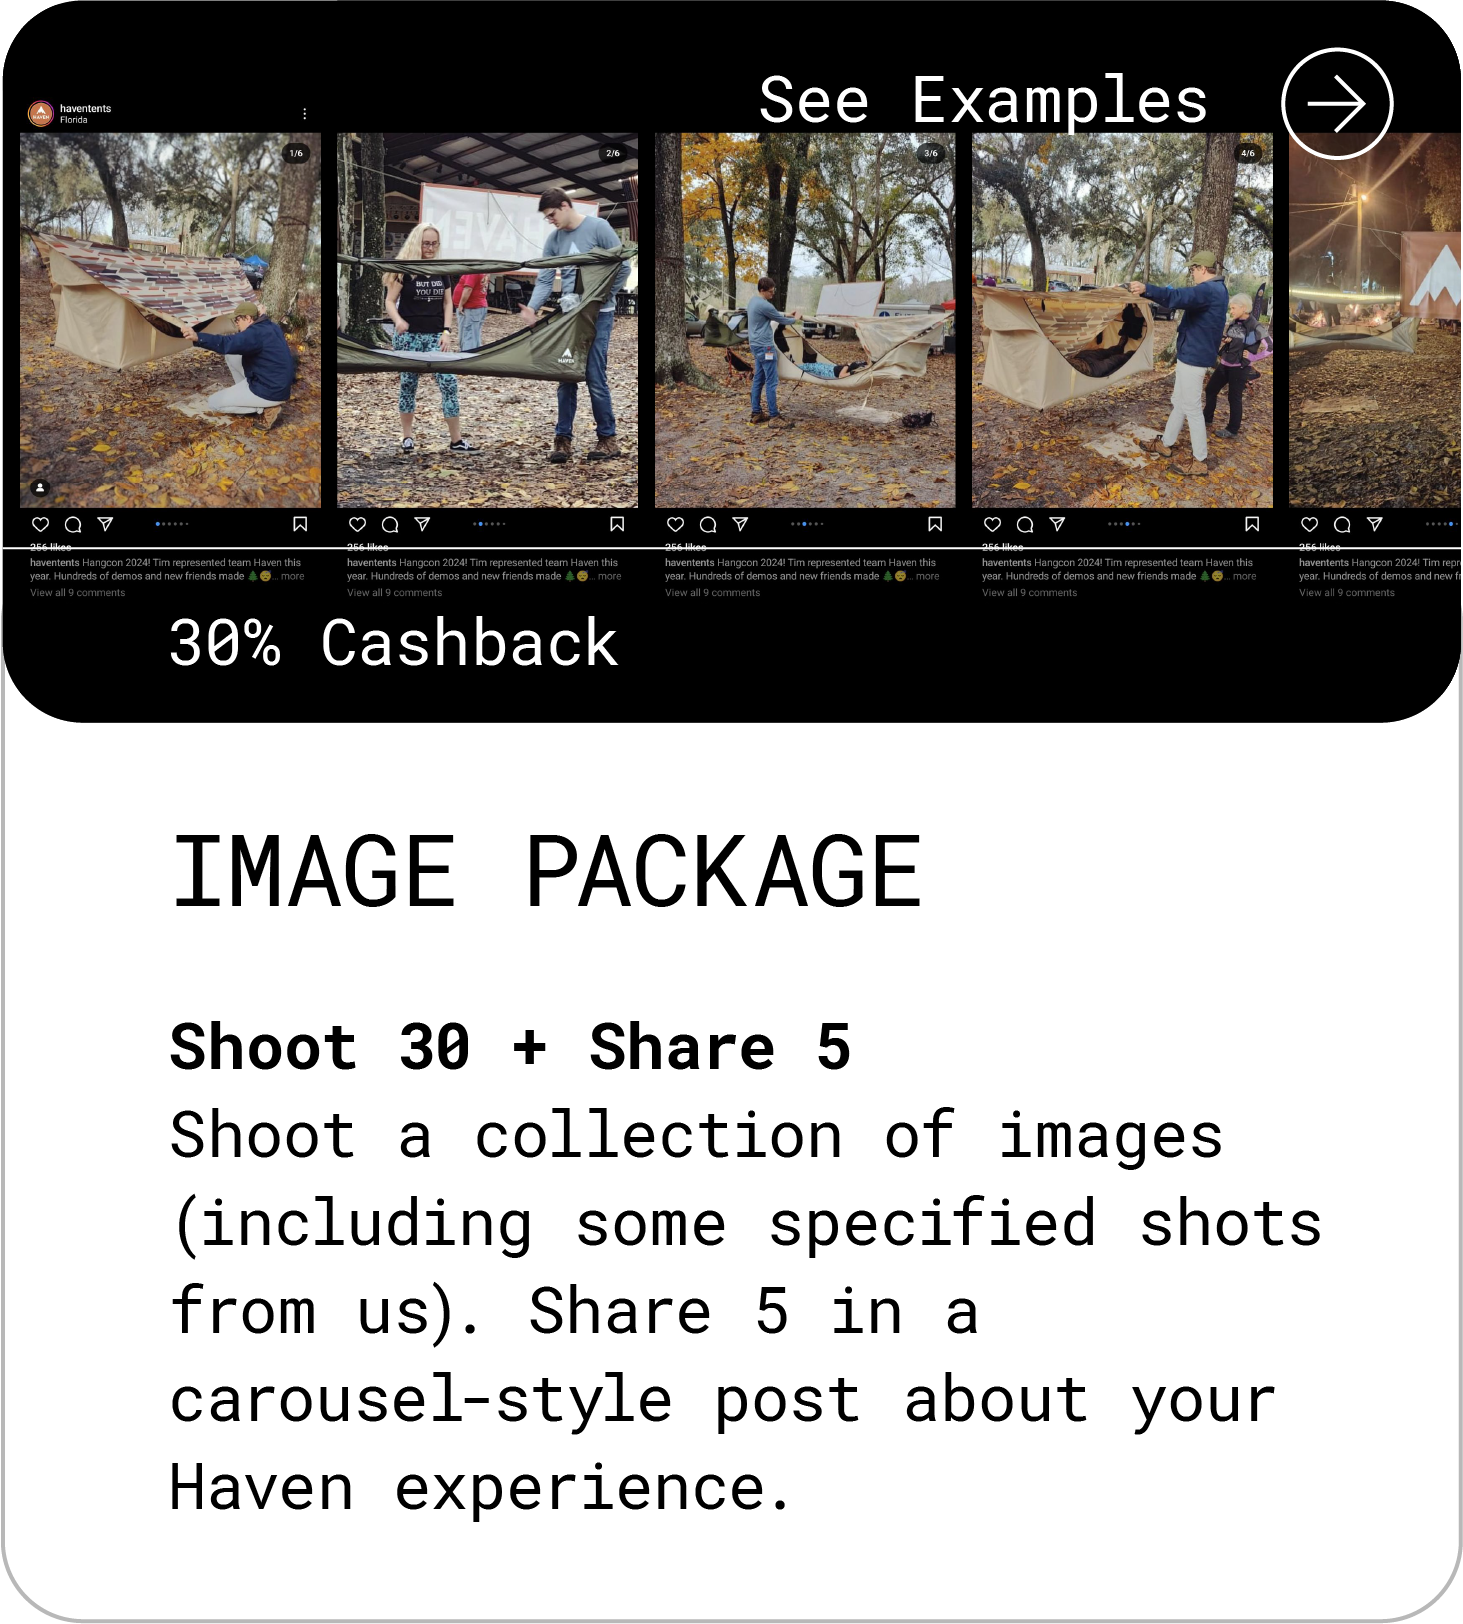 Image Package (30% Cashback). Shoot 30, Share 5 Shoot a collection of images (including some specified shots from us). Share 5 in a carousel-style post about your Haven experience. See Examples